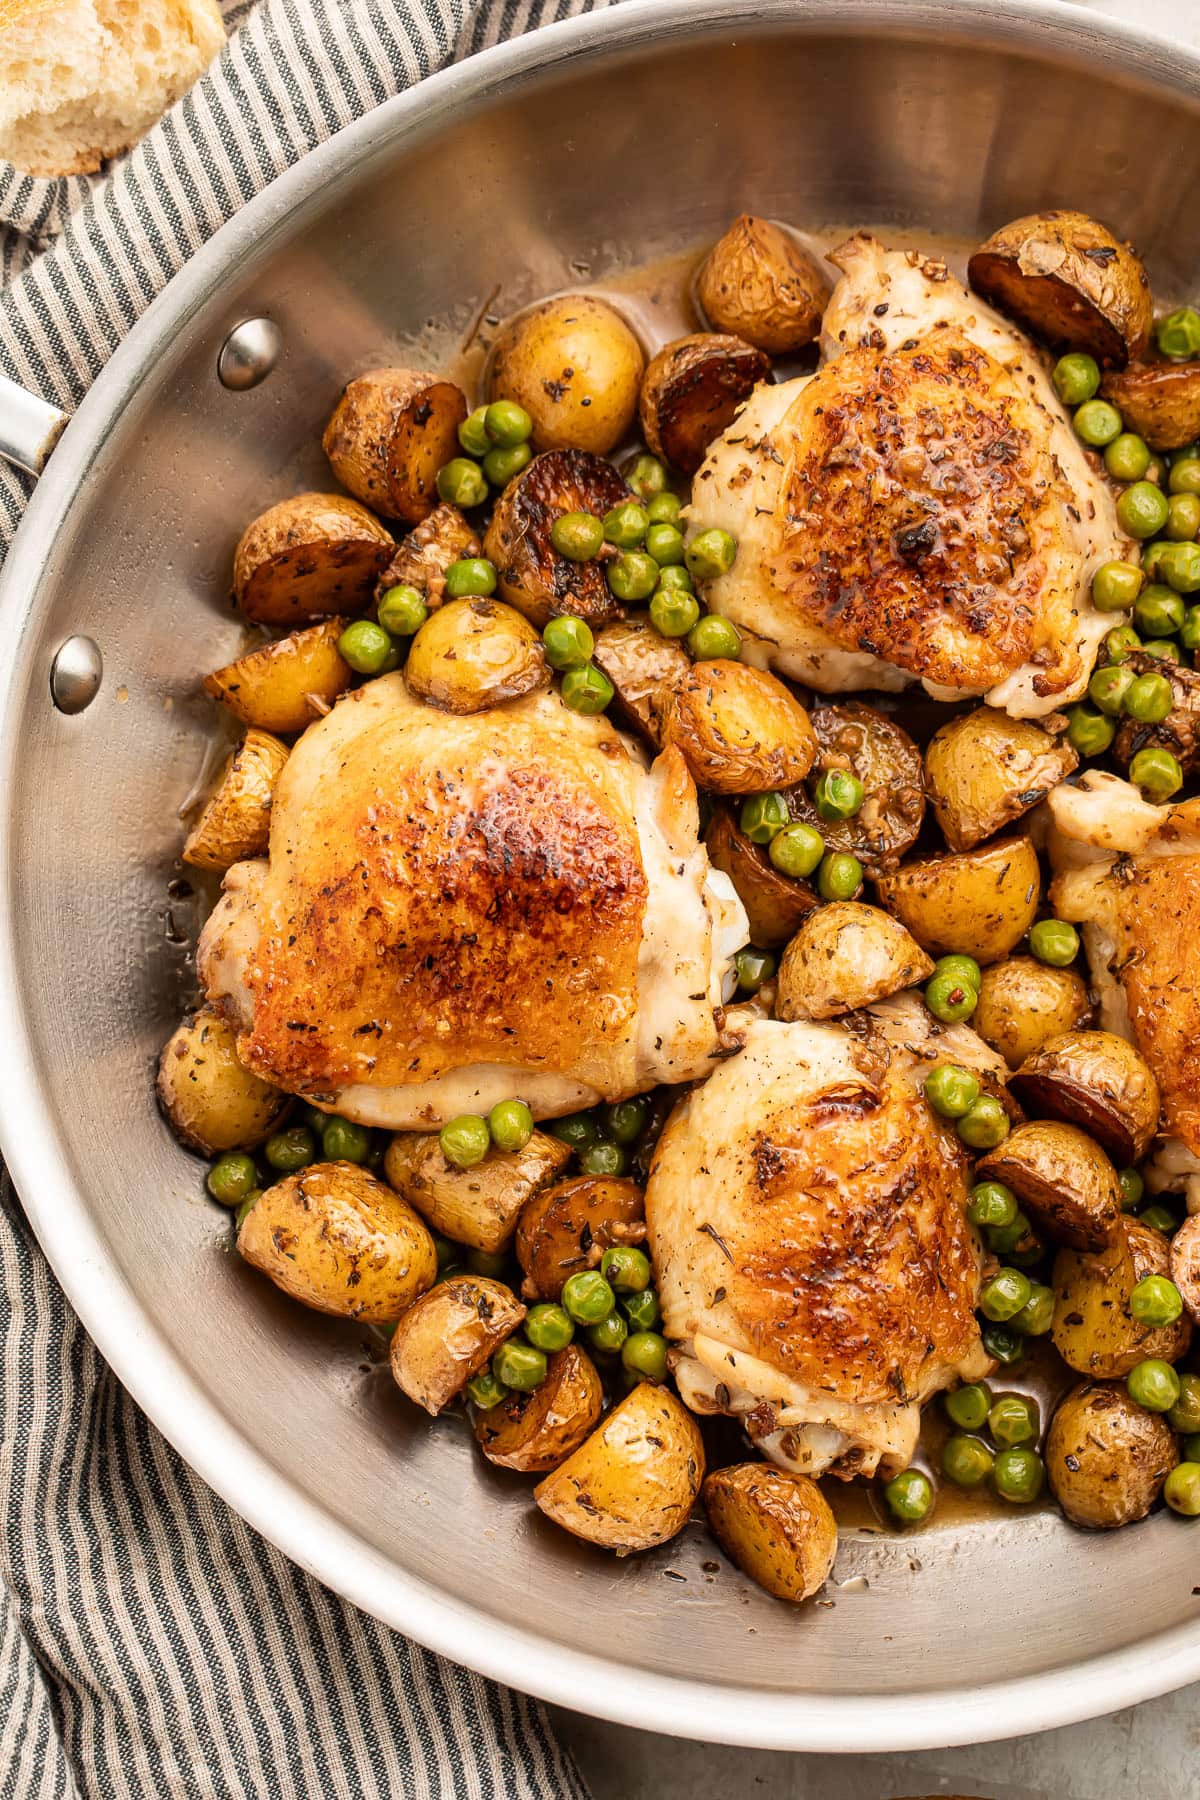 Chicken vesuvio with potatoes and peas in a large silver skillet resting on a striped kitchen towel.